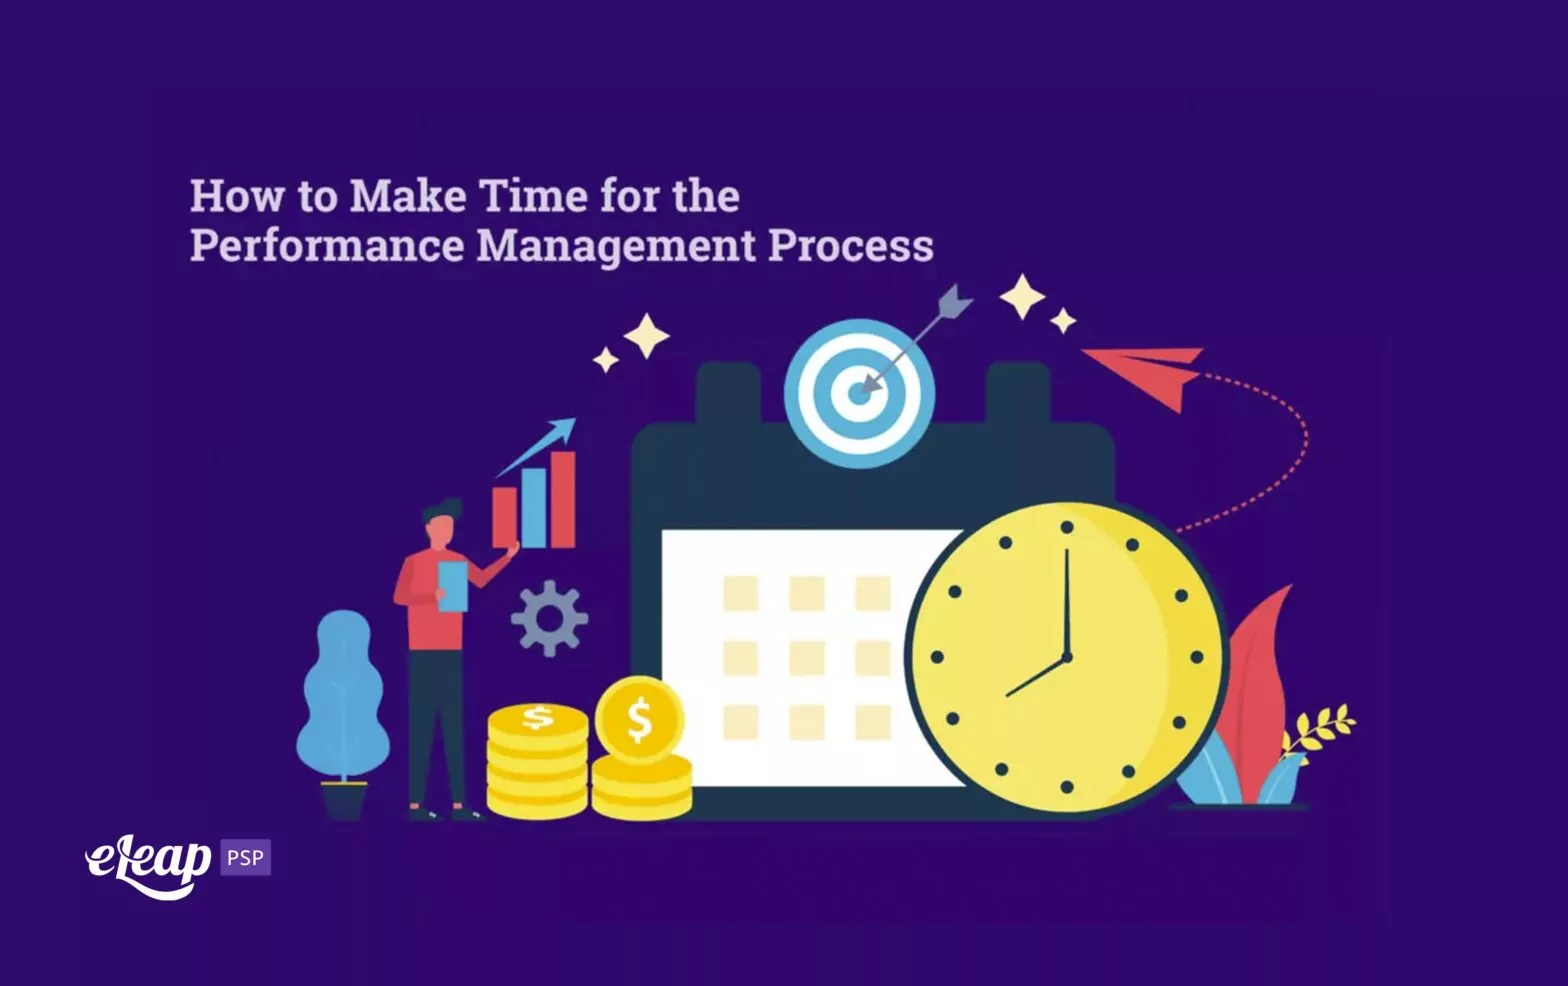 How to Make Time for the Performance Management Process